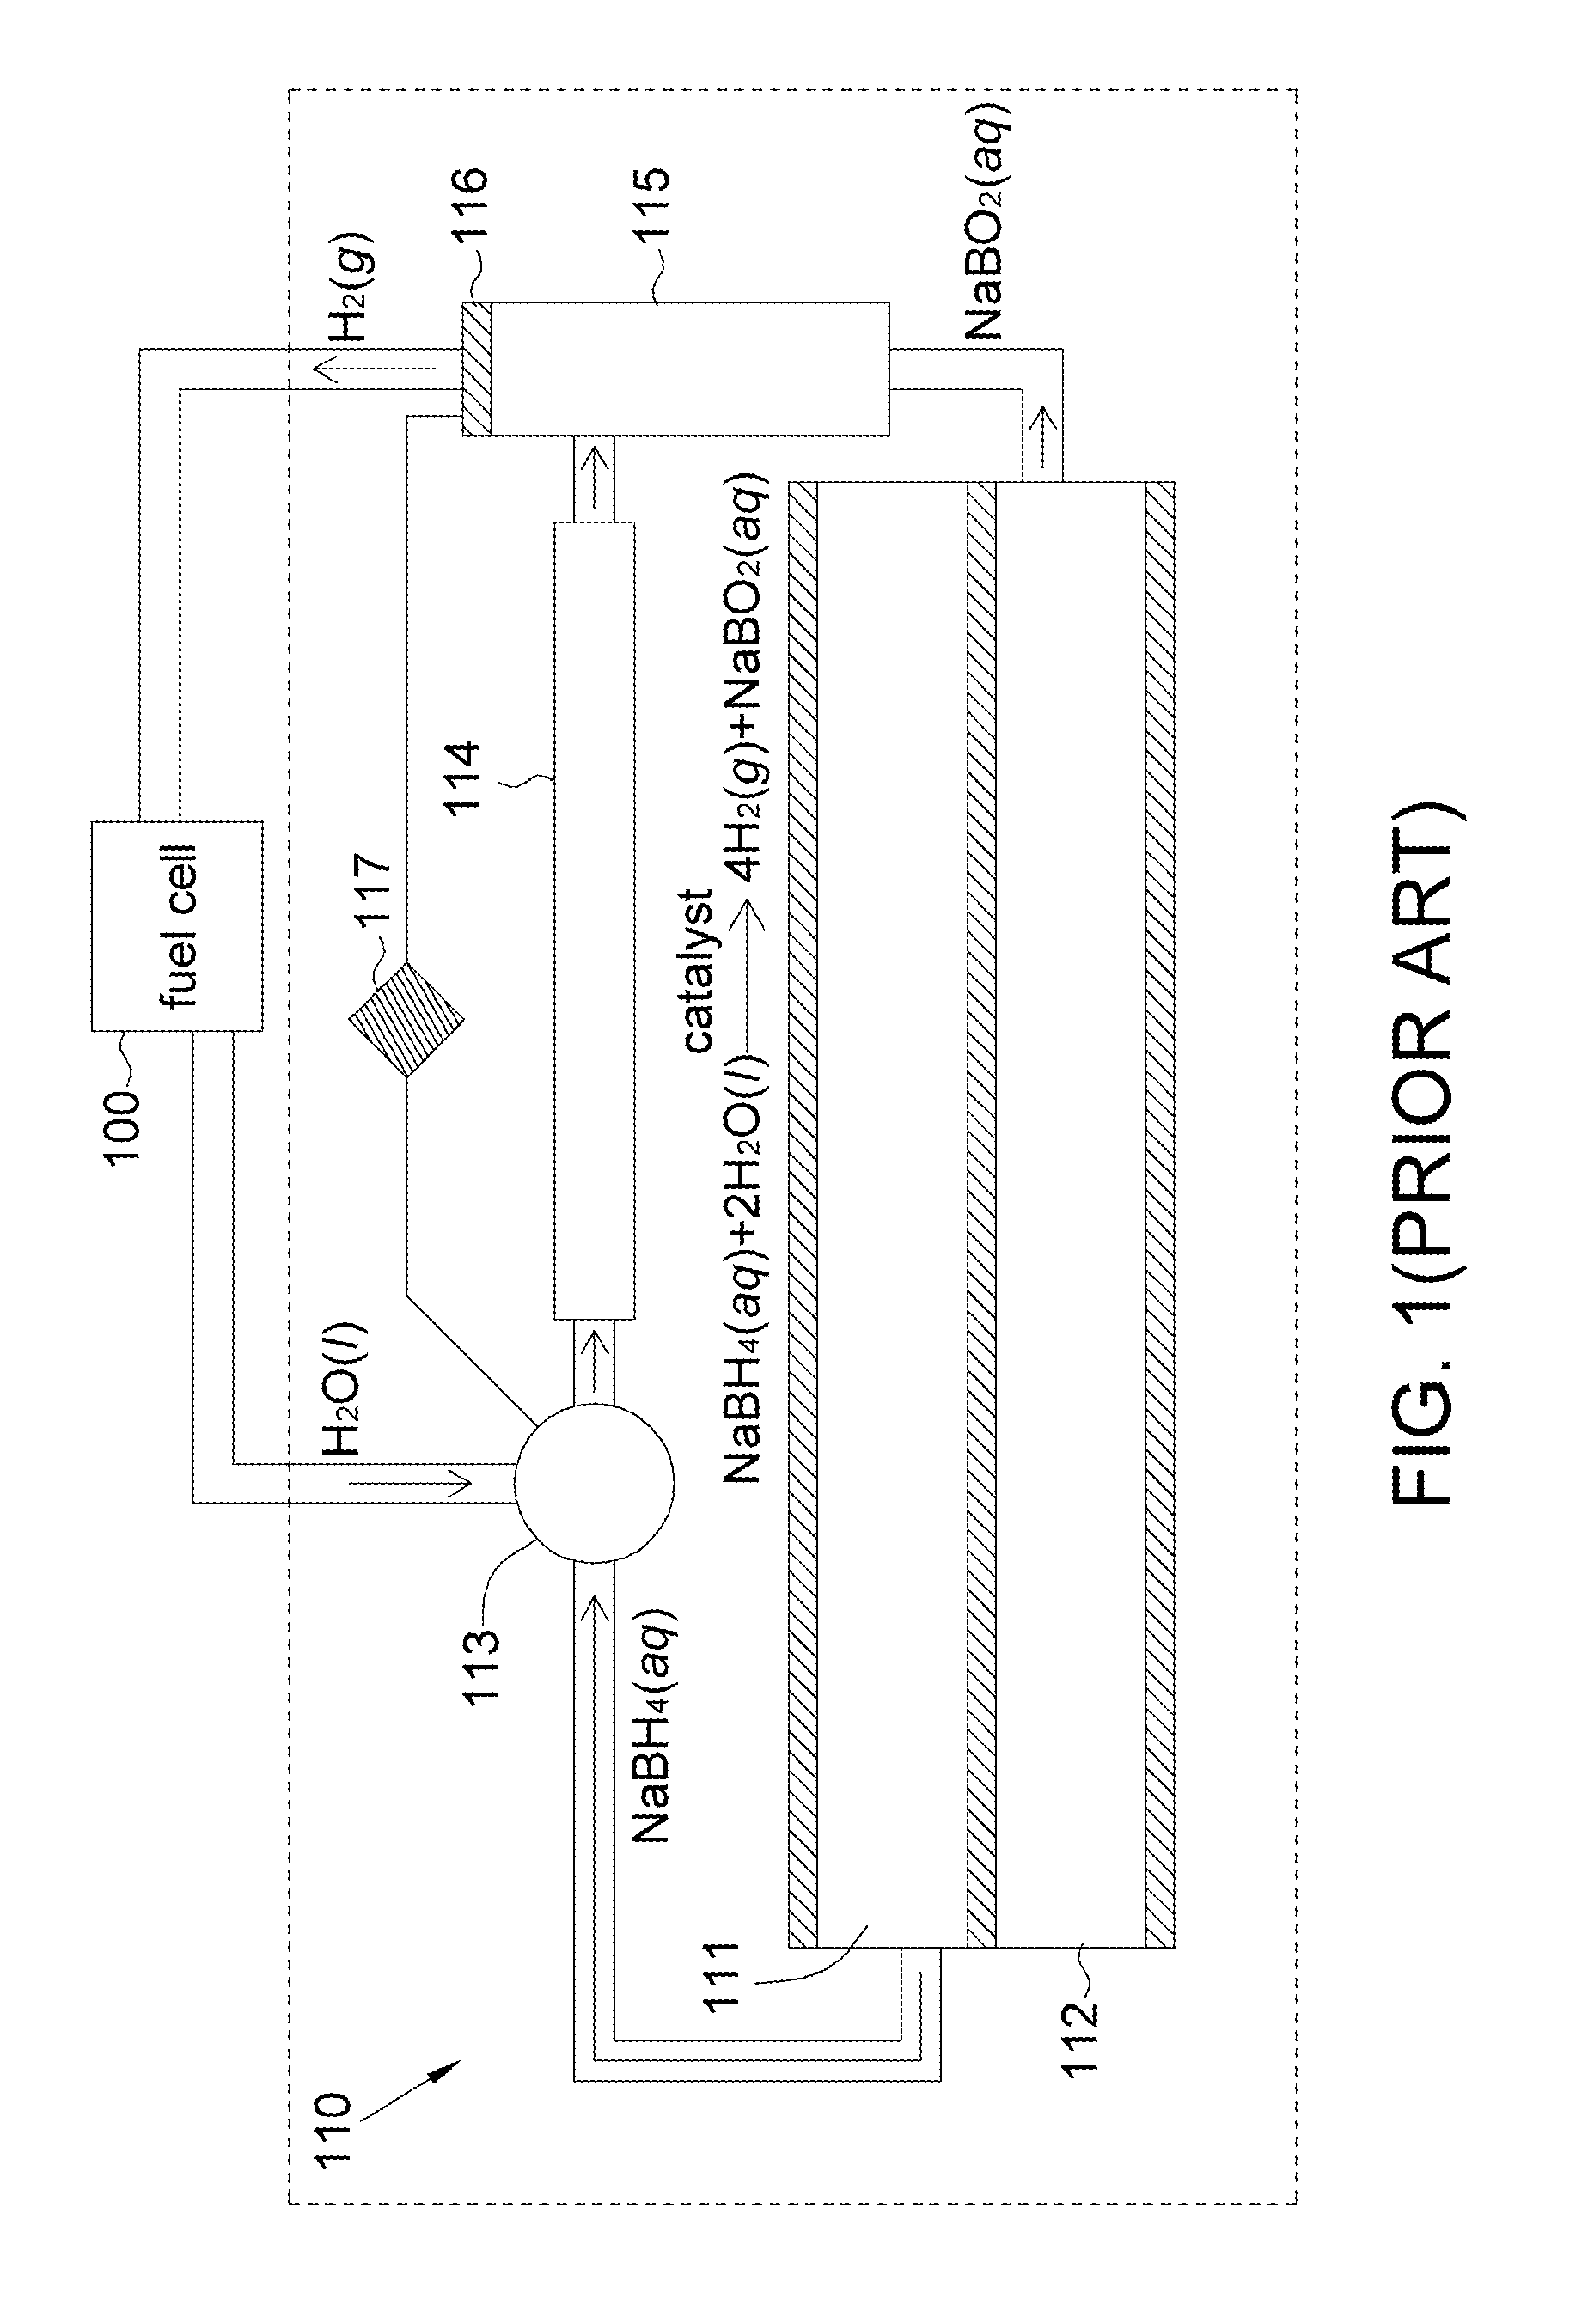 Solid Hydrogen Fuel and Methods of Manufacturing and Using the Same